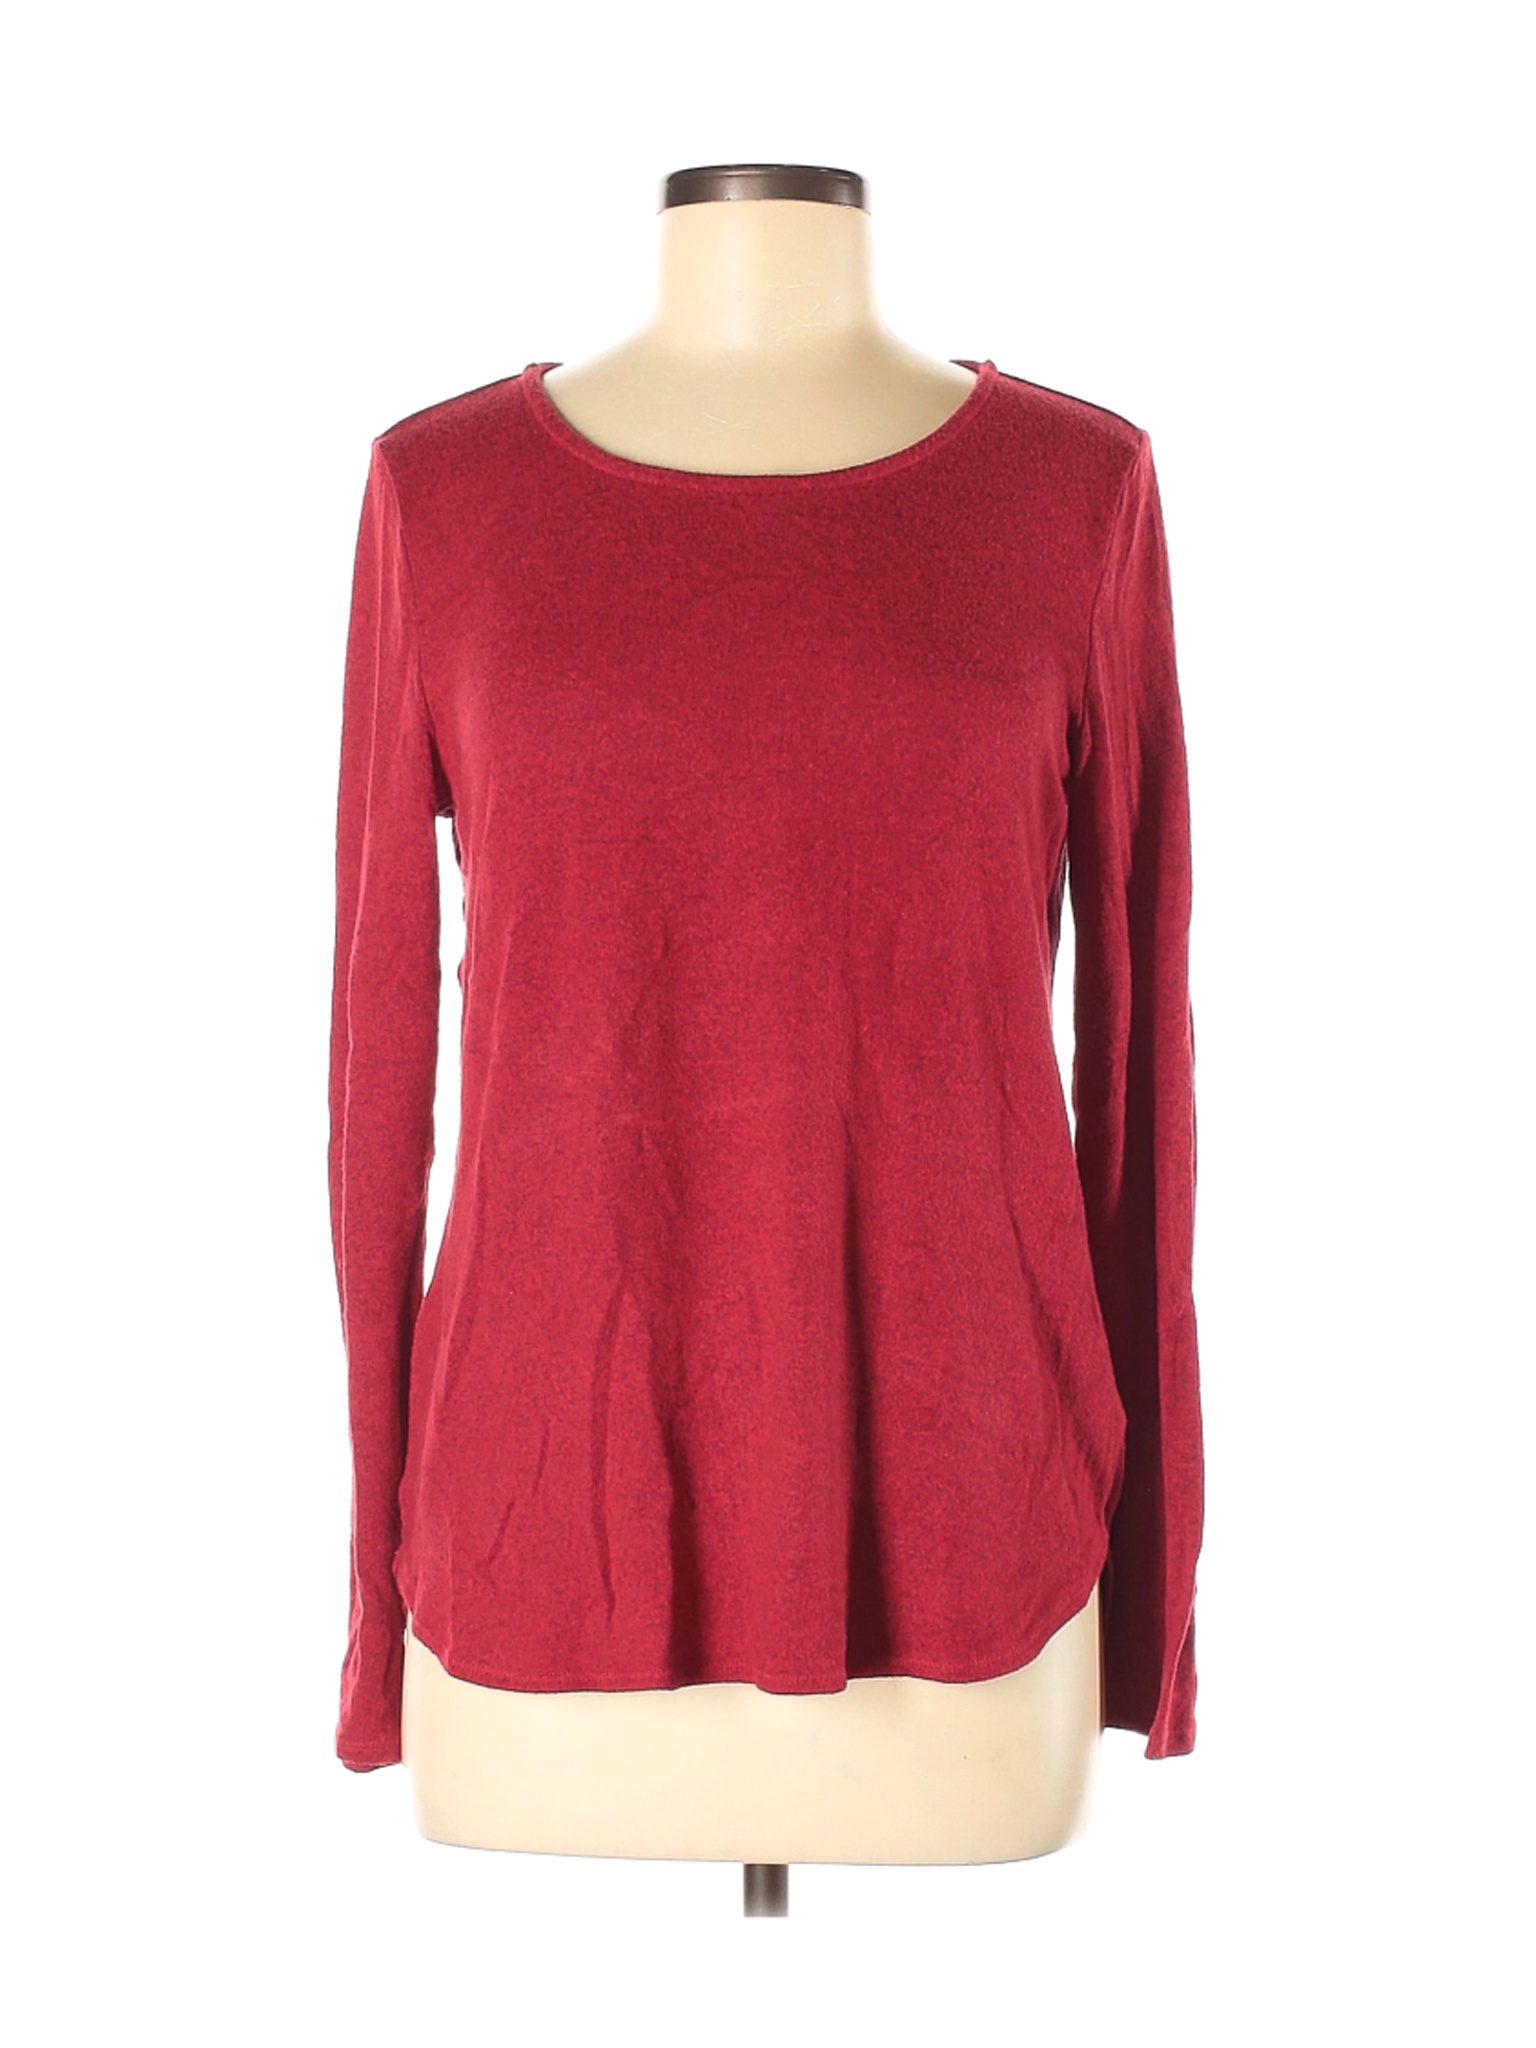 Old Navy Women Red Pullover Sweater M | eBay